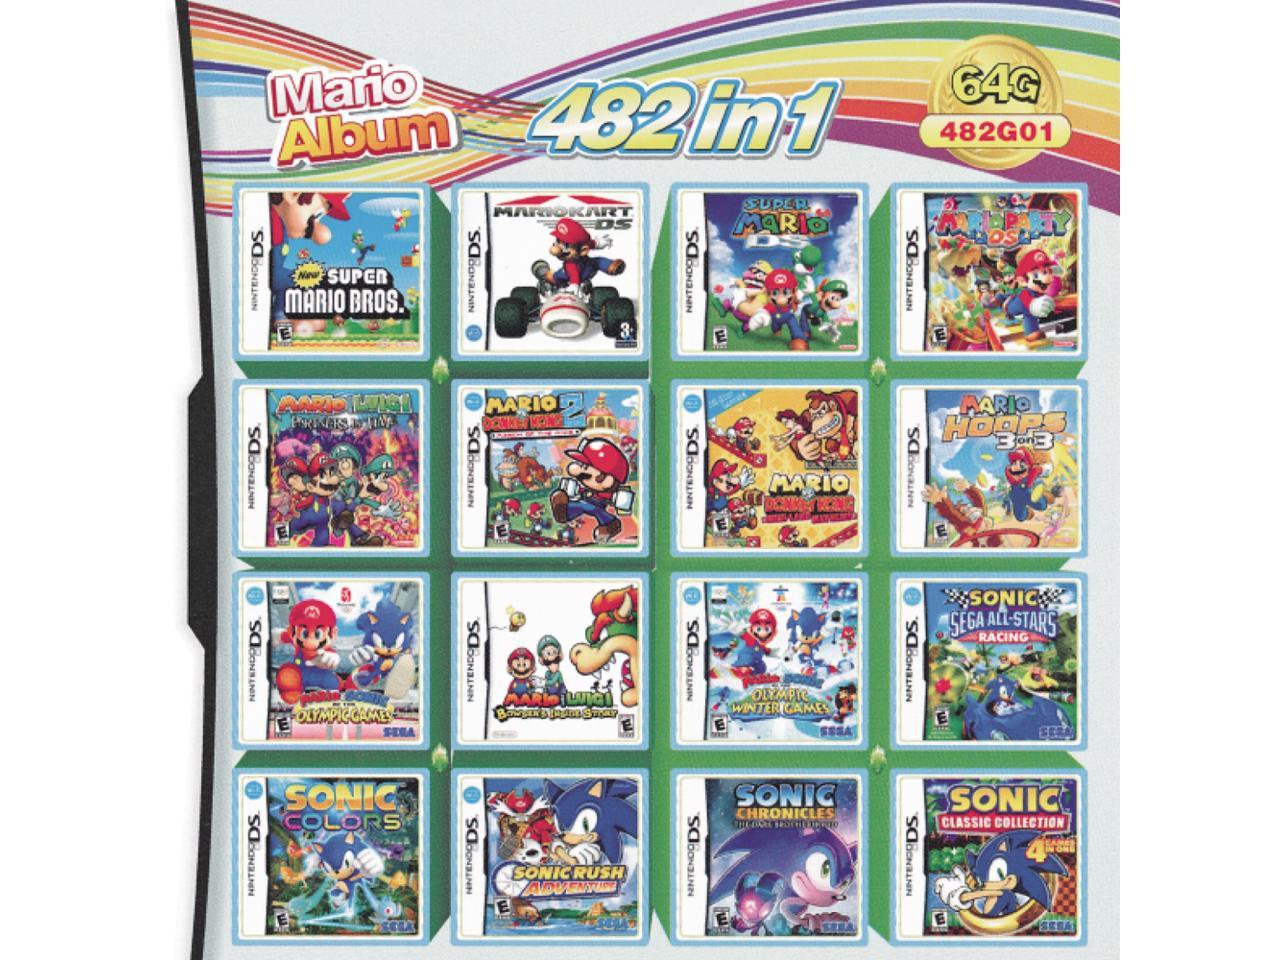 all nintendo 2ds games